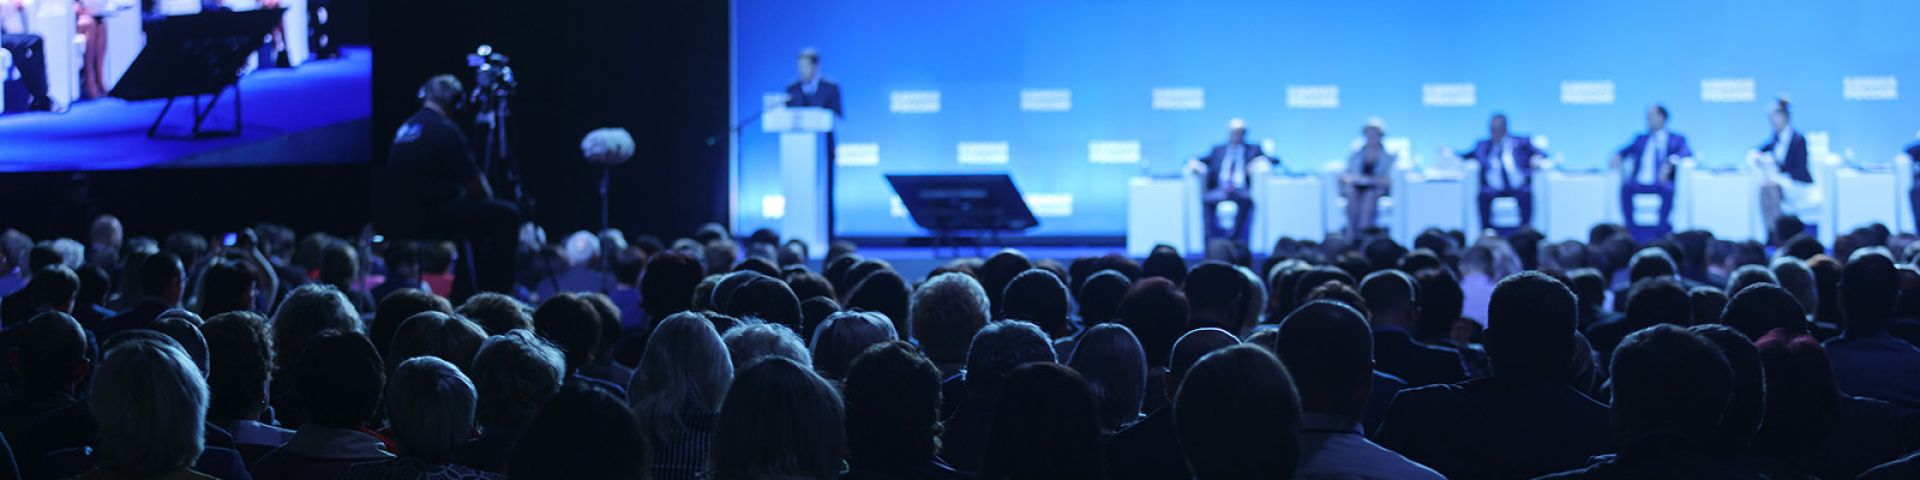 Large blue video screen backdrop behind five panelists sitting on a stage. Lots of silhouettes of the backs of audience members in the foreground.